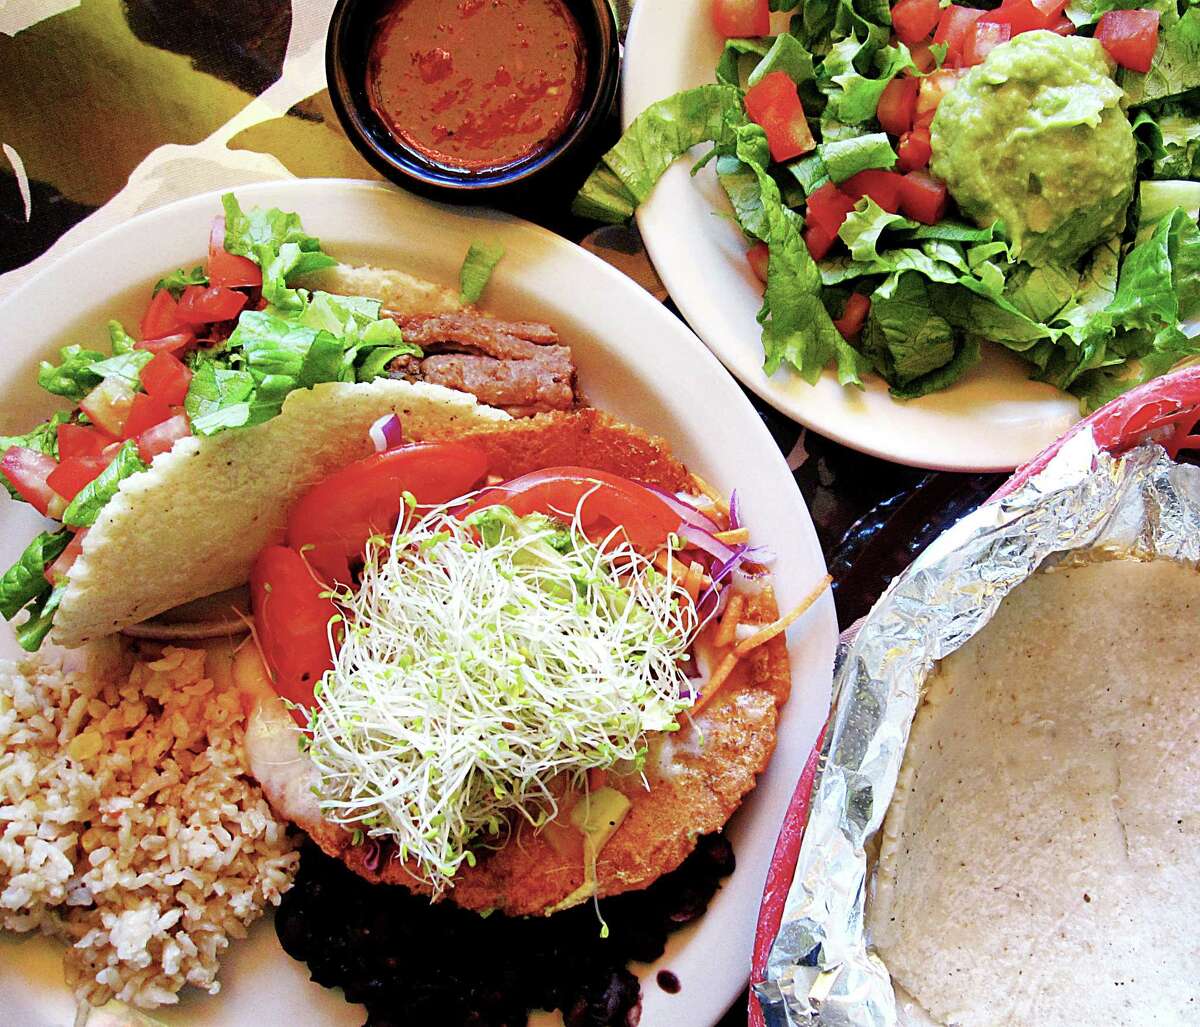 Adelante Restaurant, a health-conscious Mexican restaurant near Alamo Heights known for veggie tacos and tamales for four decades, is closing April 1 of next year.